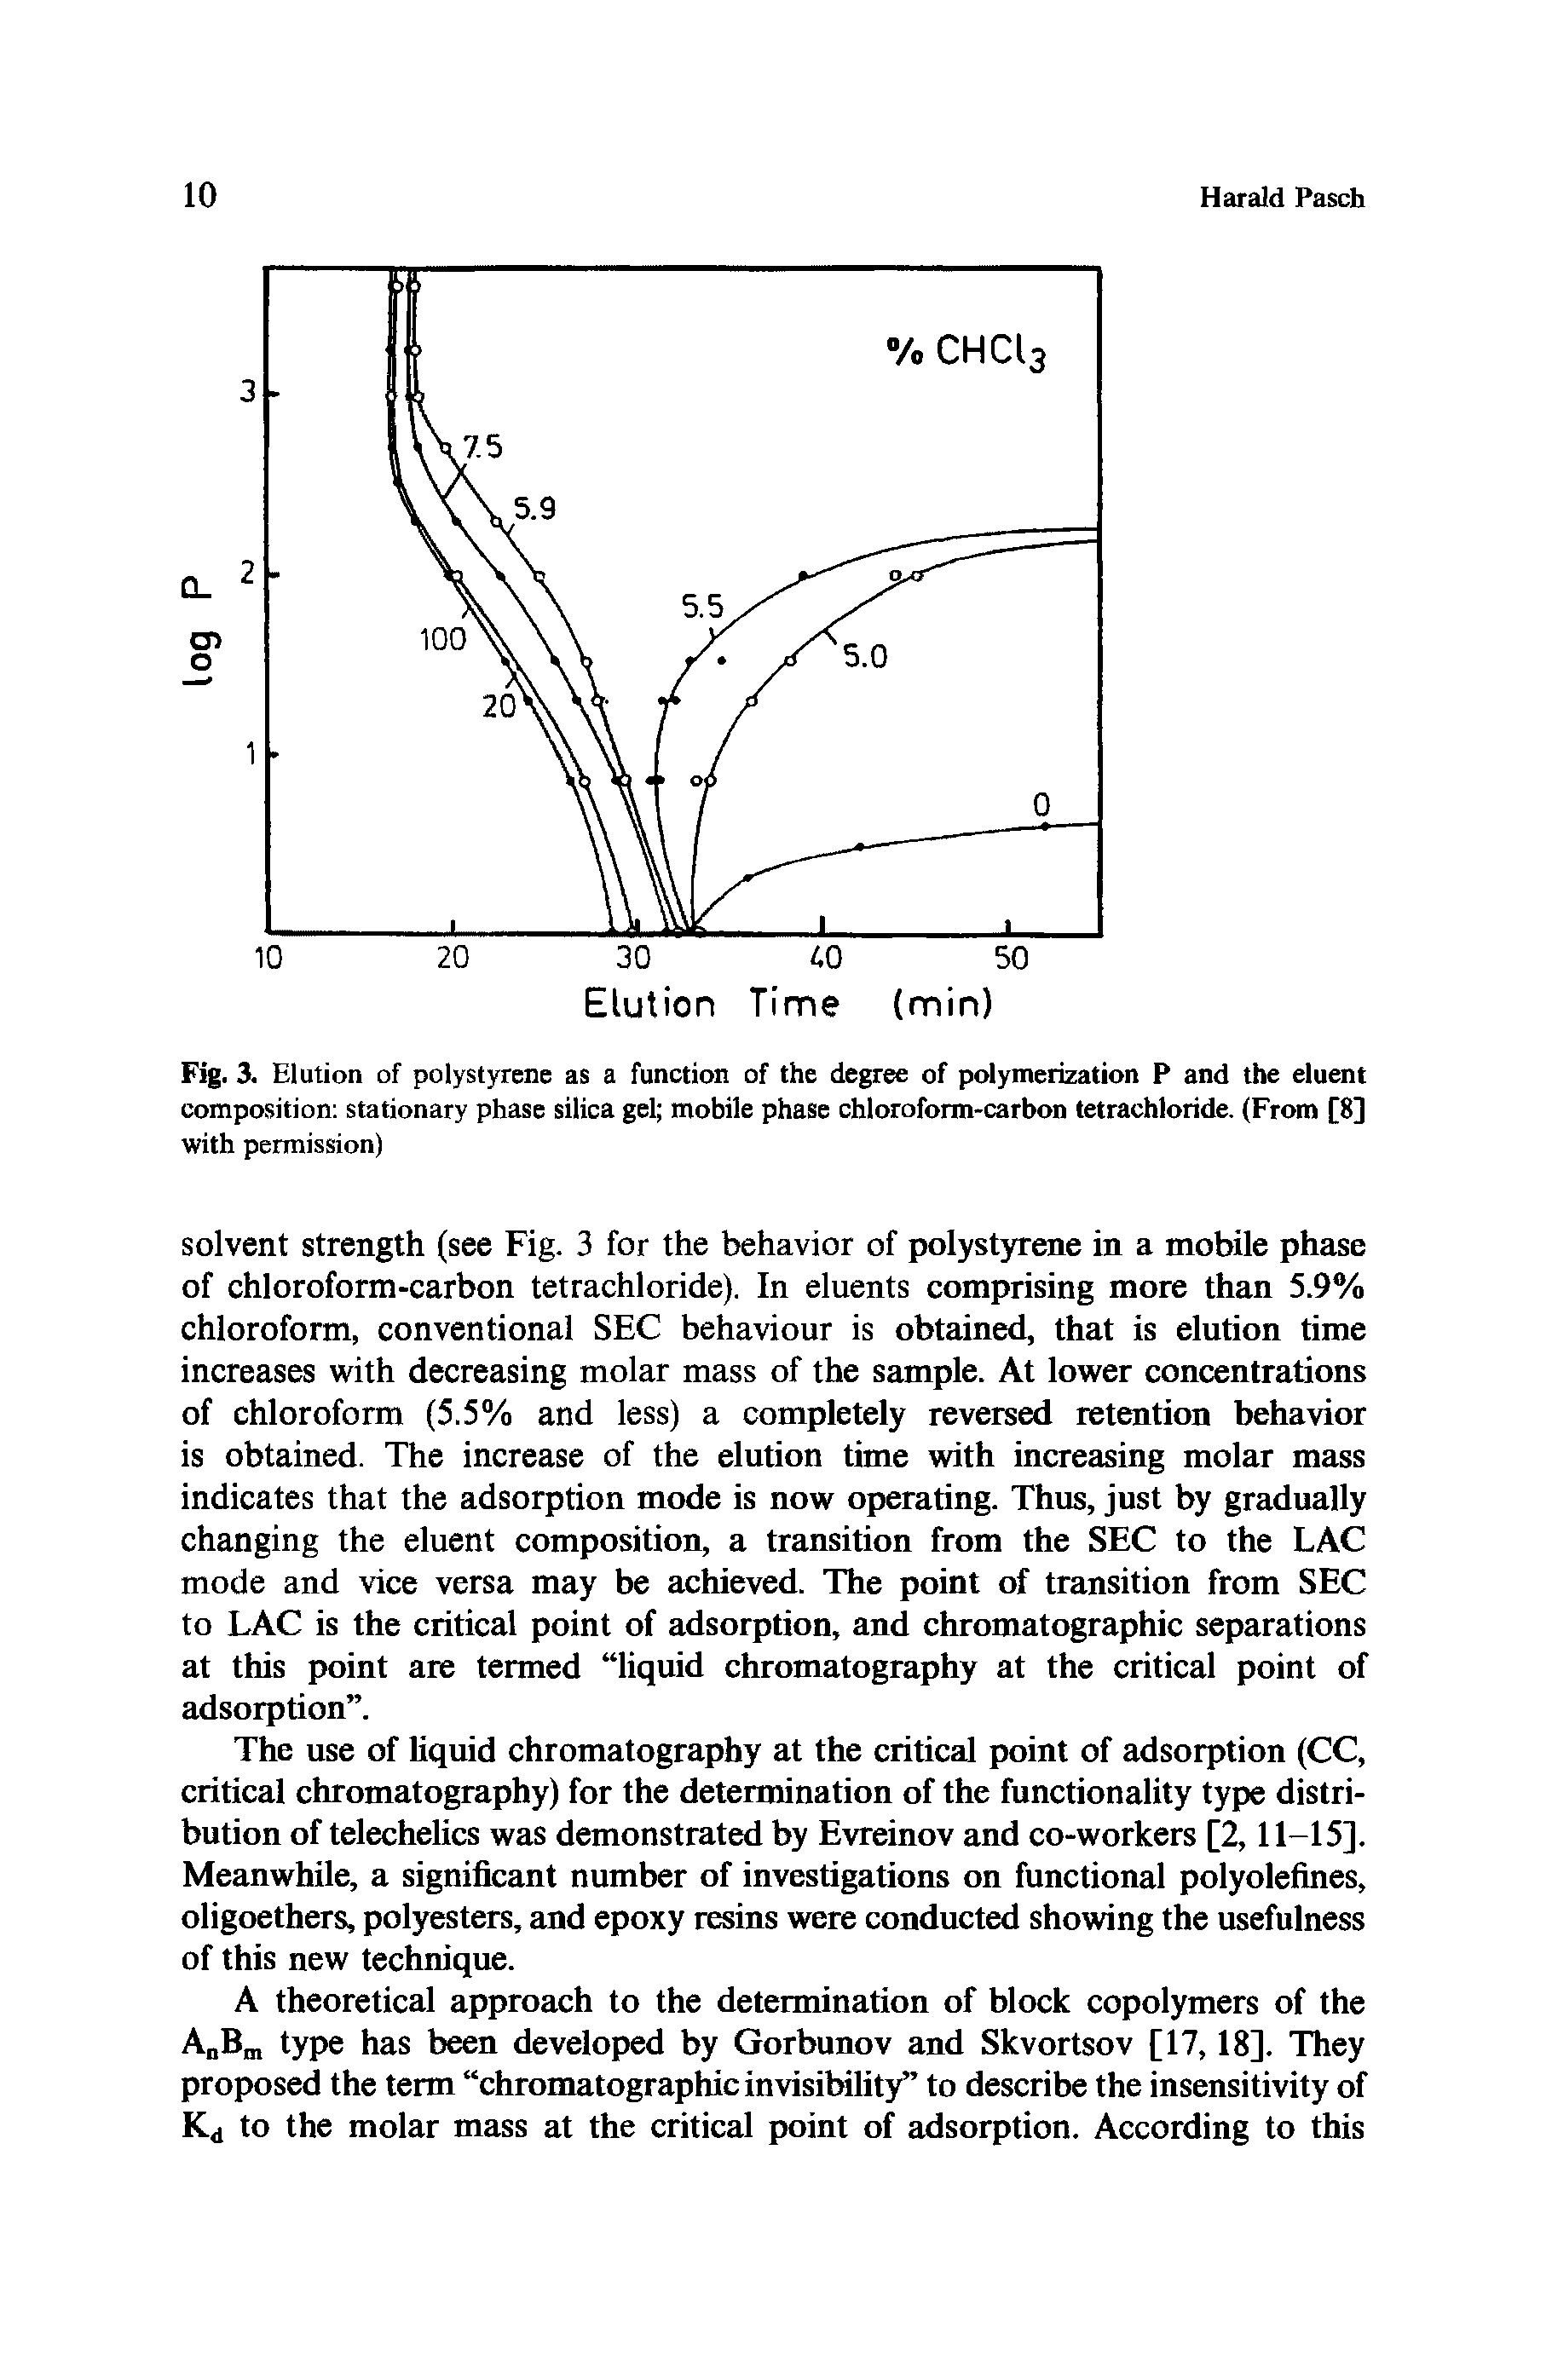 Fig. 3. Elution of polystyrene as a function of the degree of polymerization P and the eluent composition stationary phase silica gel mobile phase chloroform-carbon tetrachloride. (From [8] with permission)...